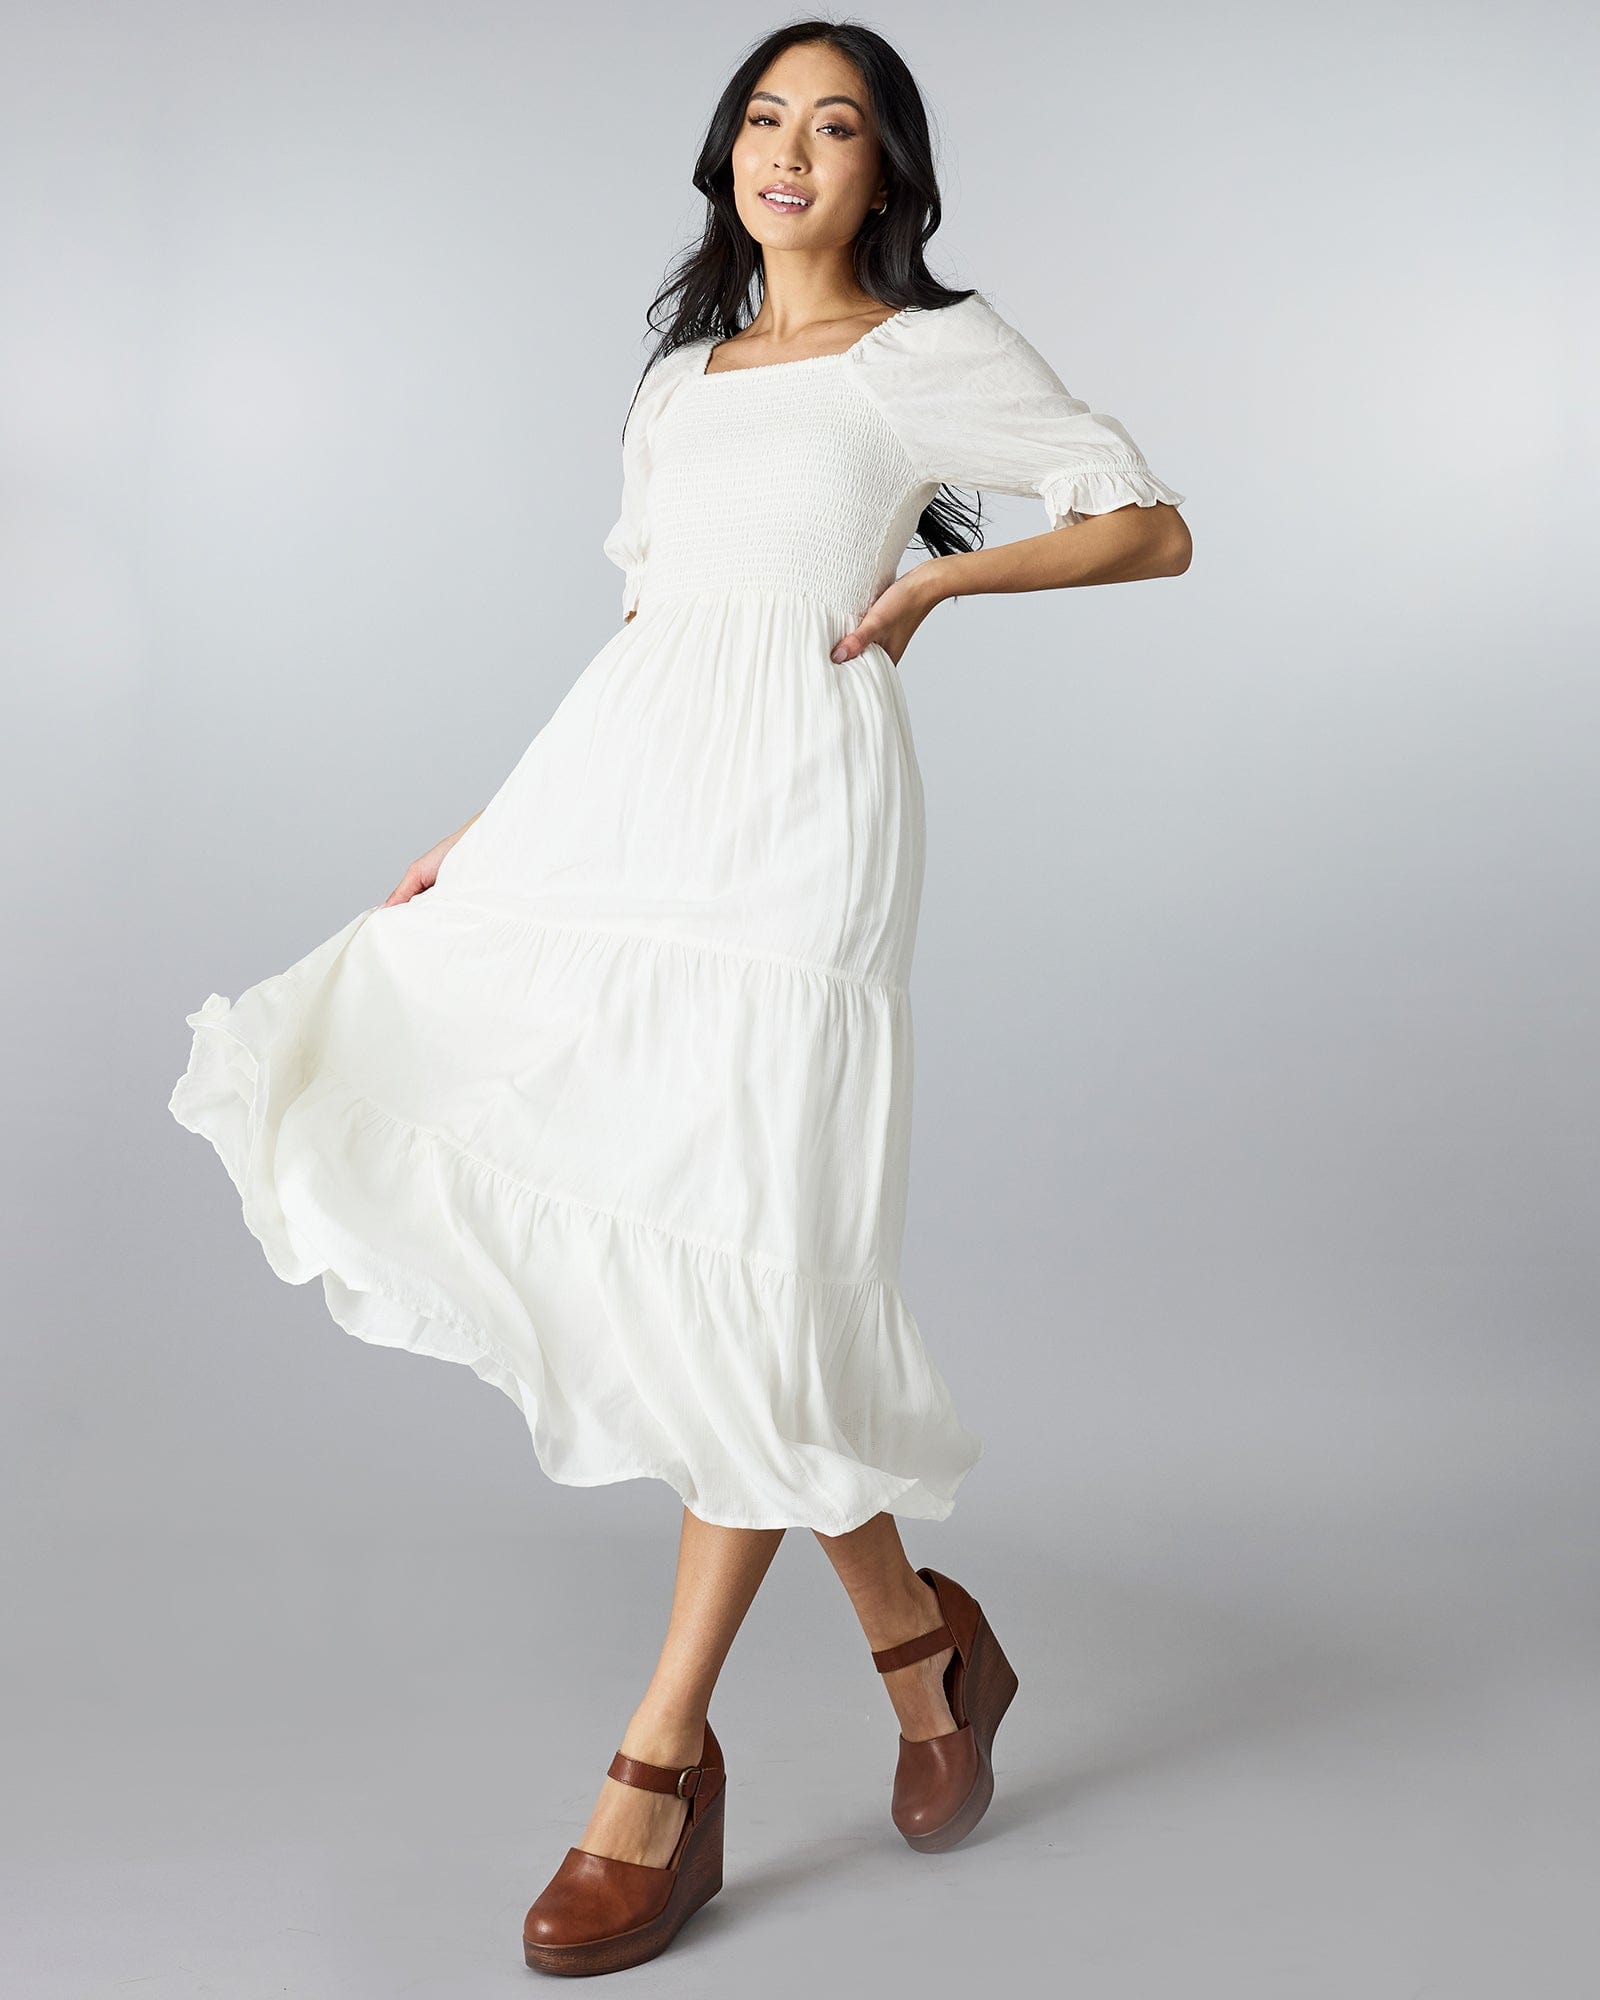 Woman in a white, half sleeved dress with a square neckline and tiers down the skirt.